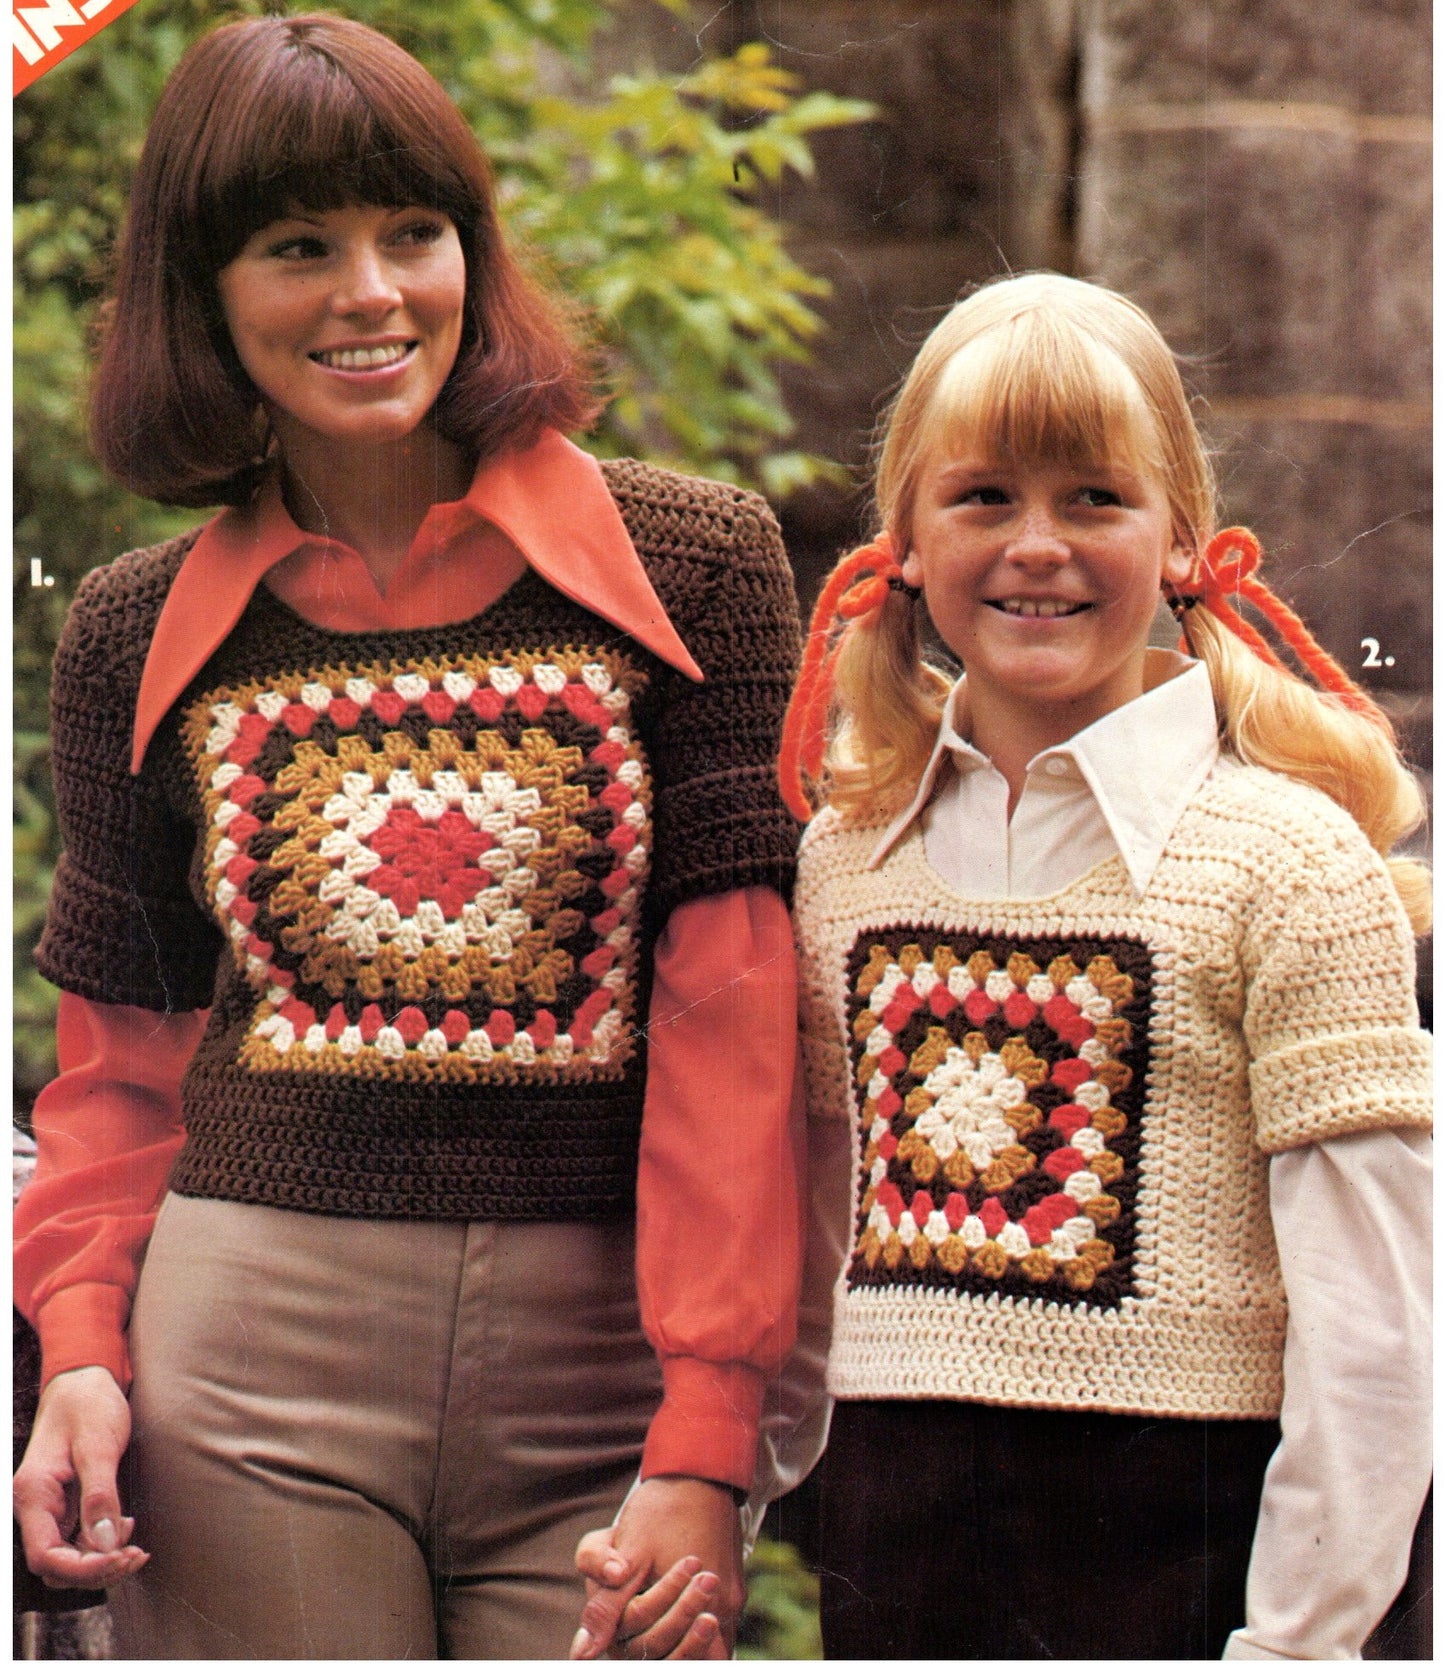 Vintage Crochet Granny Square Afghan and Sweater Pattern Child and Adult Sizes Download PDF - At Grandma's Table